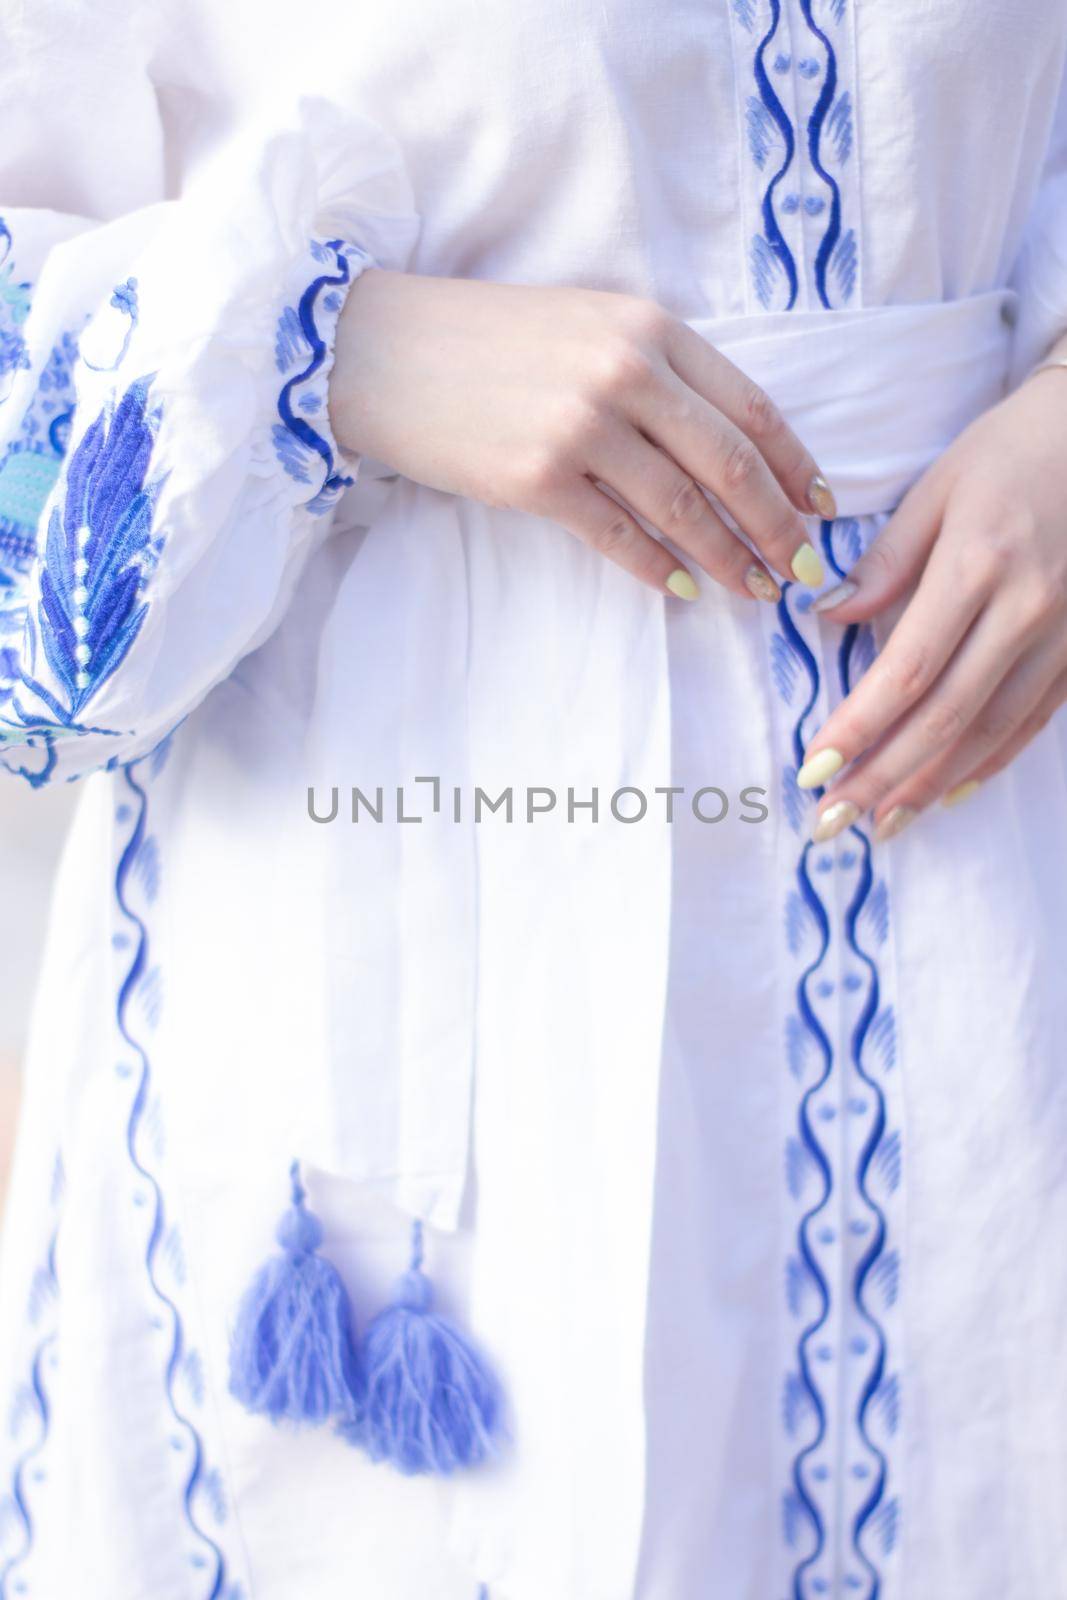 close up of national traditional ukrainian clothes. details of woman in embroidered dress. unrecognizable person.